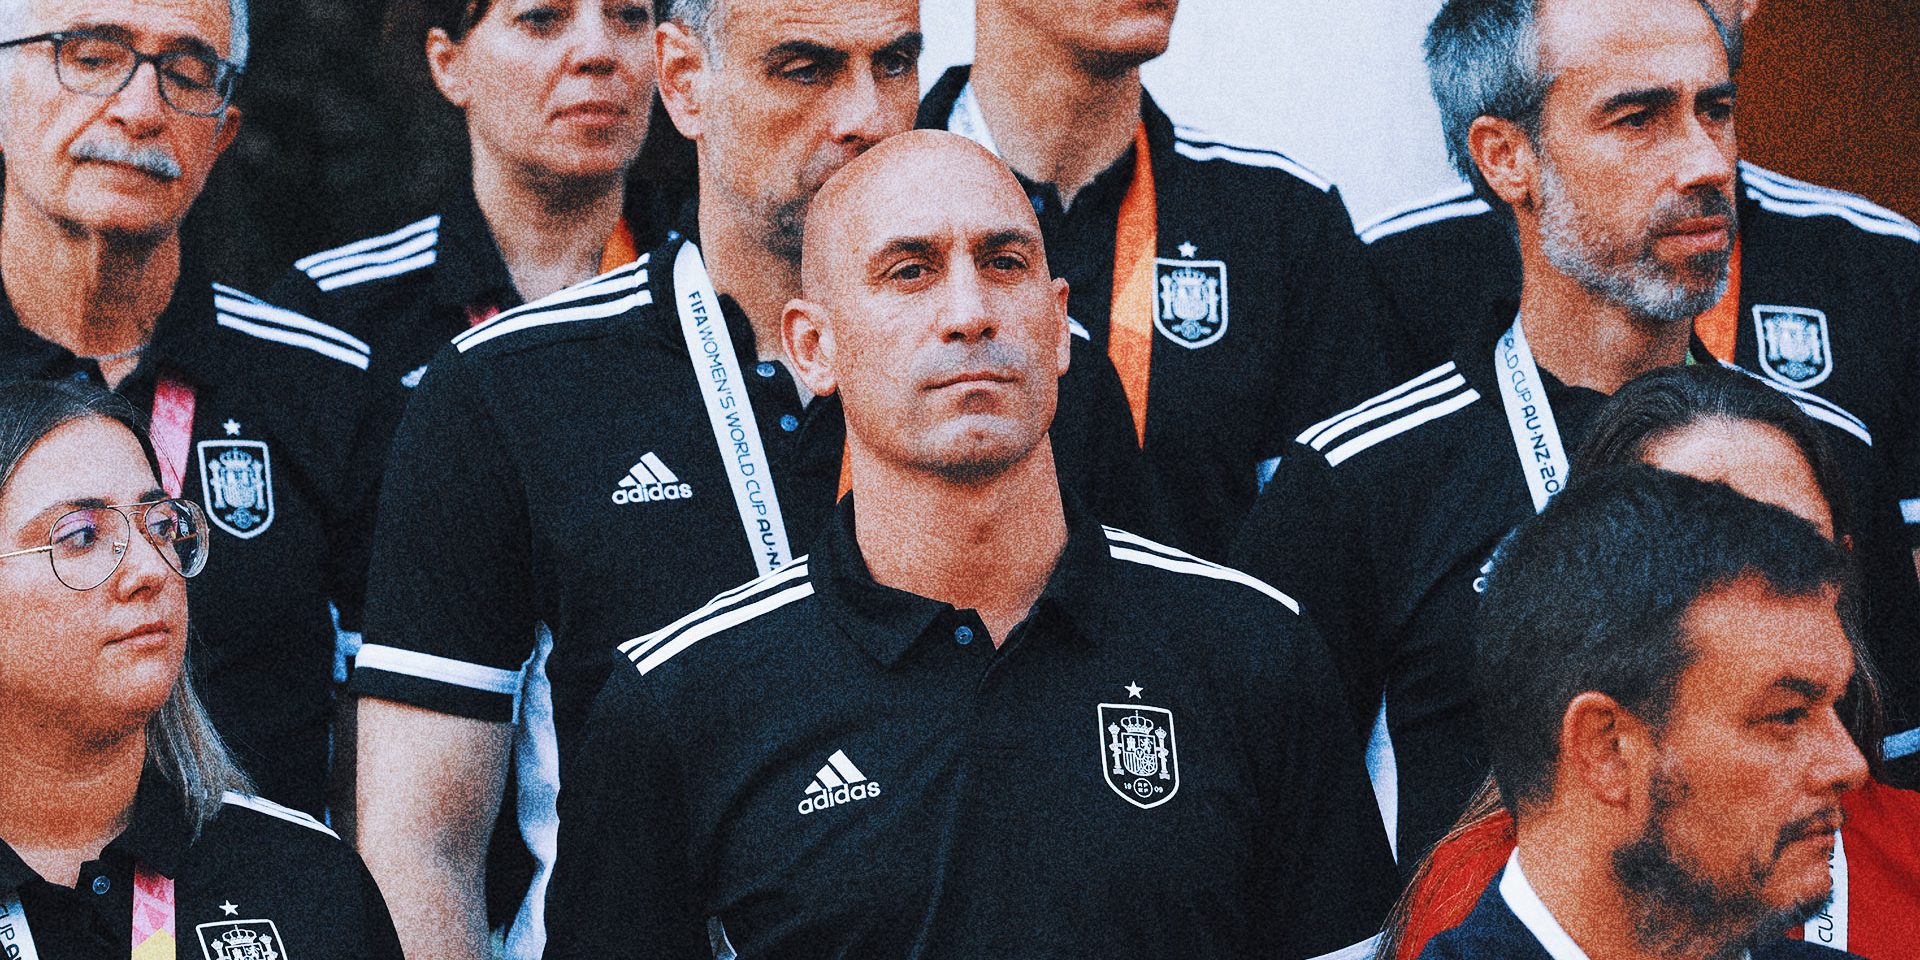 Luis Rubiales was suspended by FIFA to prevent witness tampering in kiss case